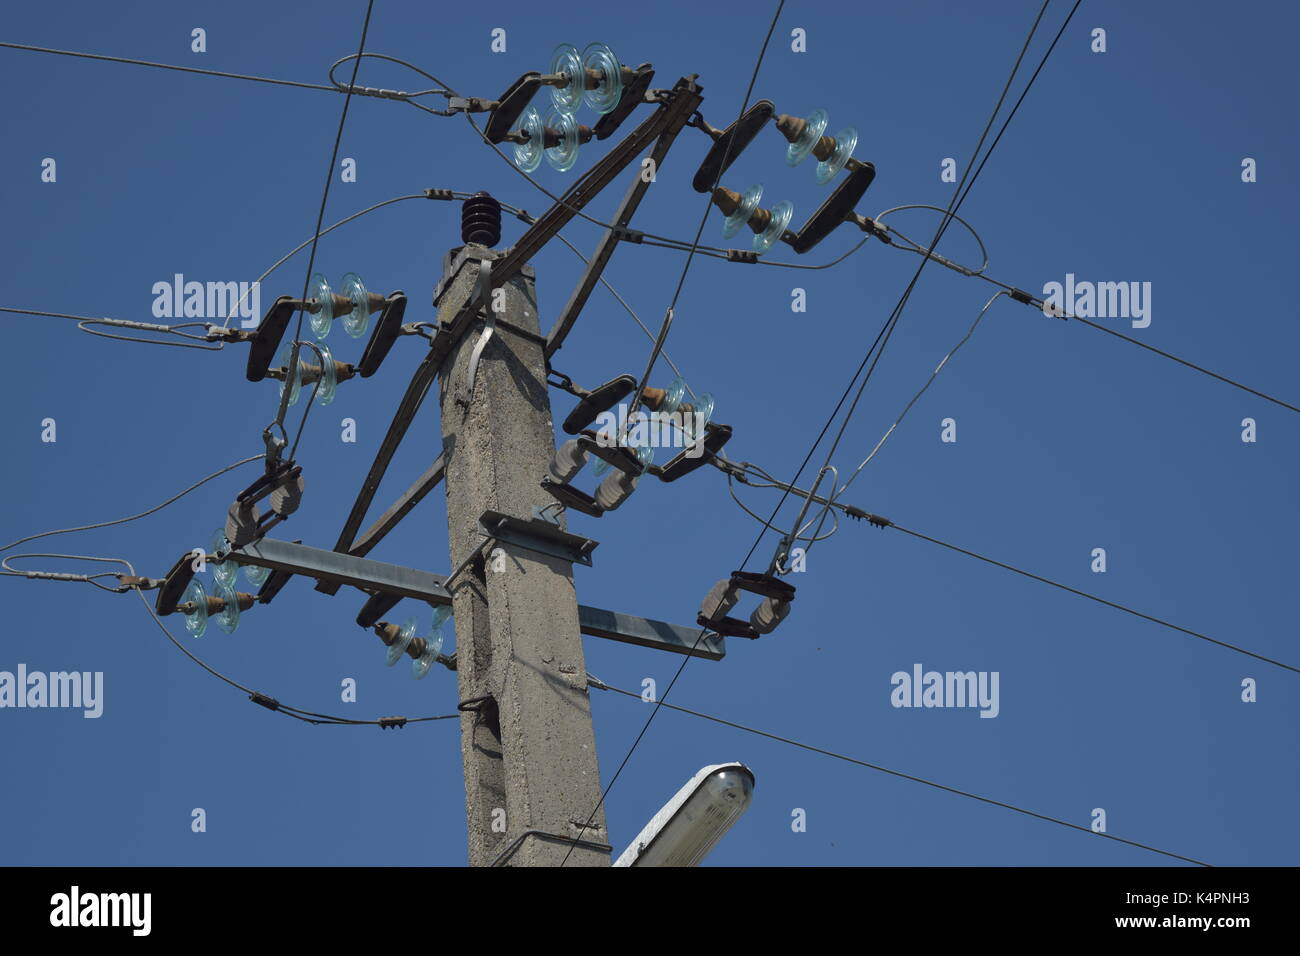 Tall electric line on a pole Stock Photo